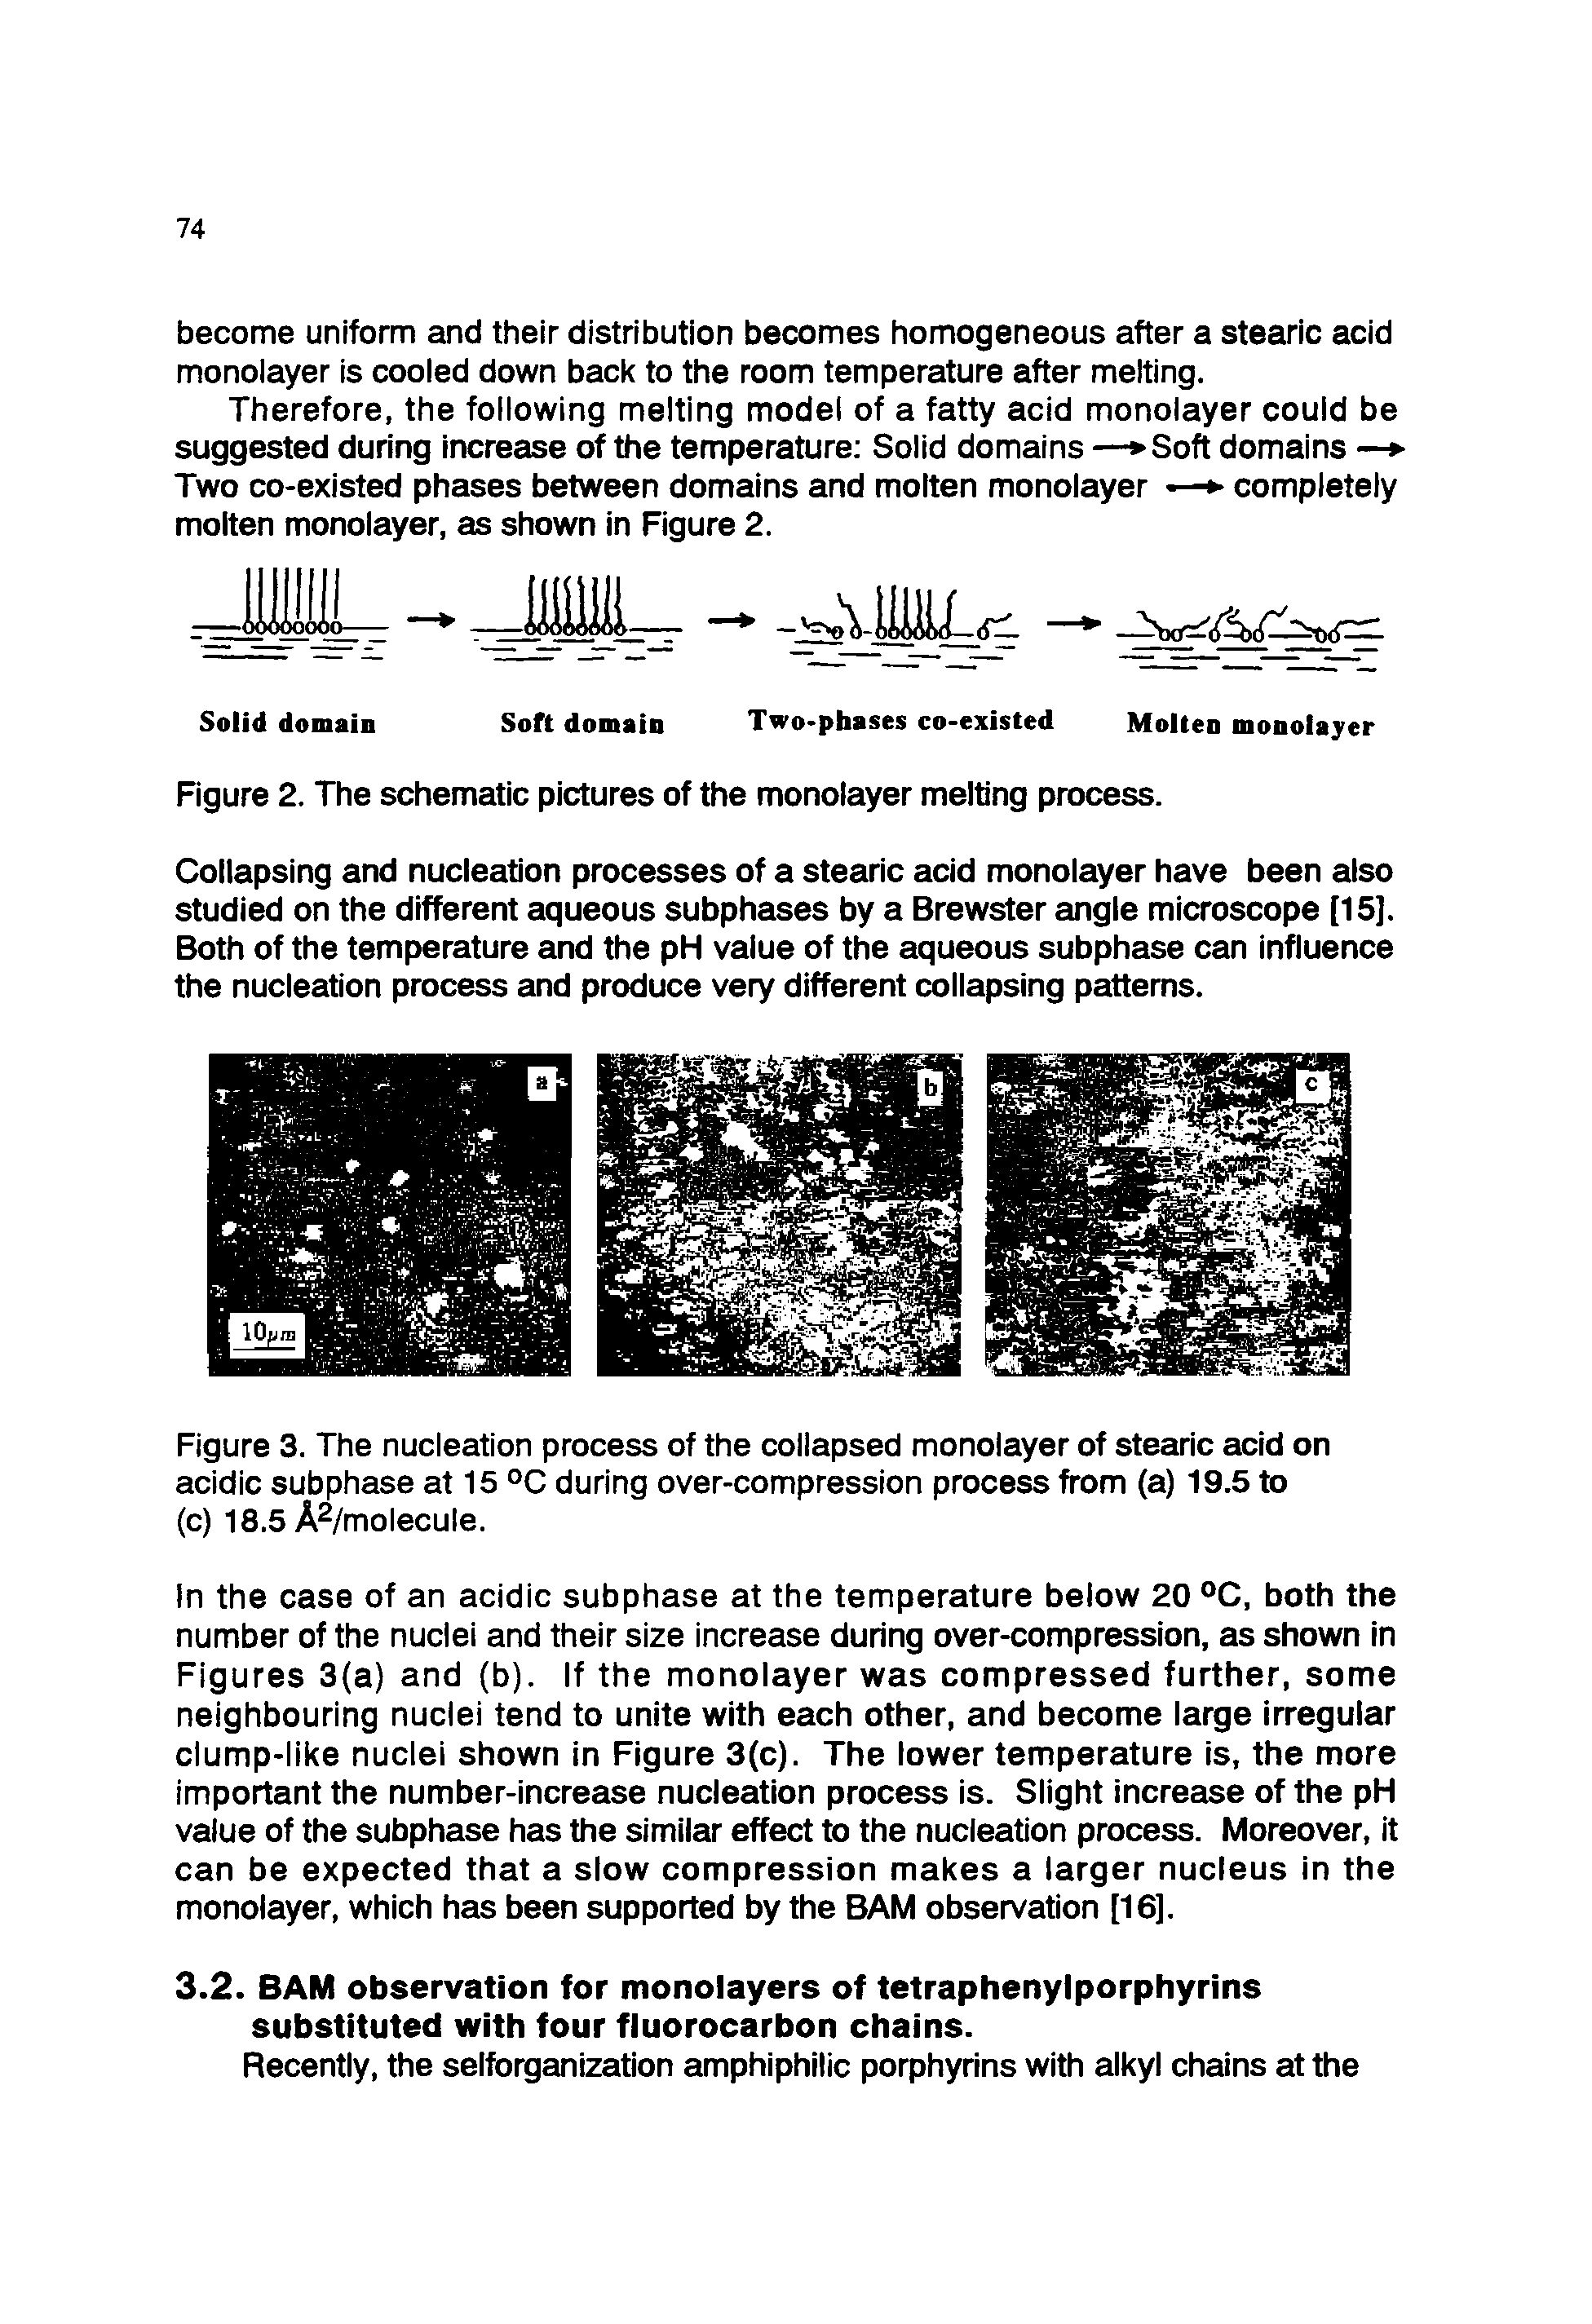 Figure 3. The nucleation process of the collapsed monolayer of stearic acid on acidic subphase at 15 °C during over-compression process from (a) 19.5 to (c) 18.5 A2/molecule.